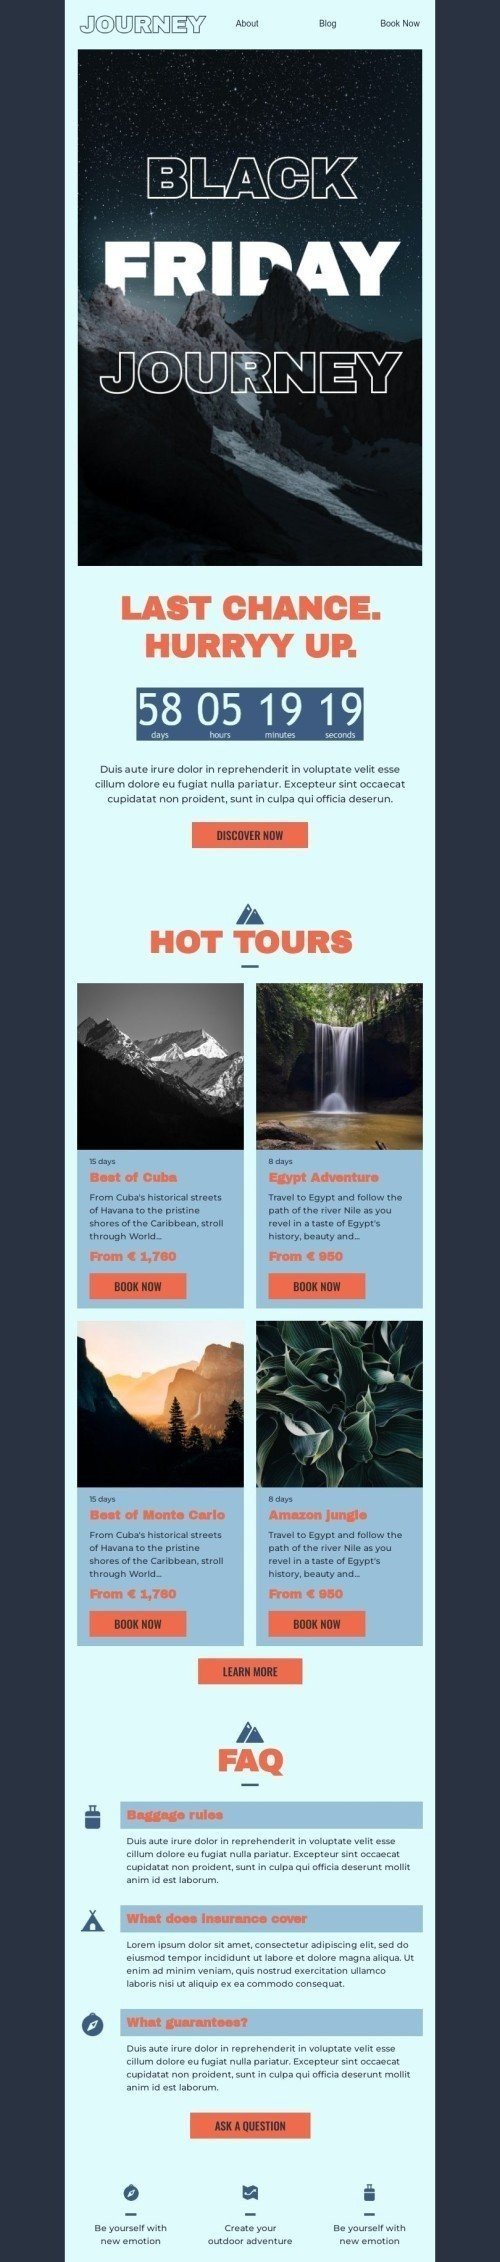 Black Friday Email Template "Black Friday journey" for Travel industry desktop view